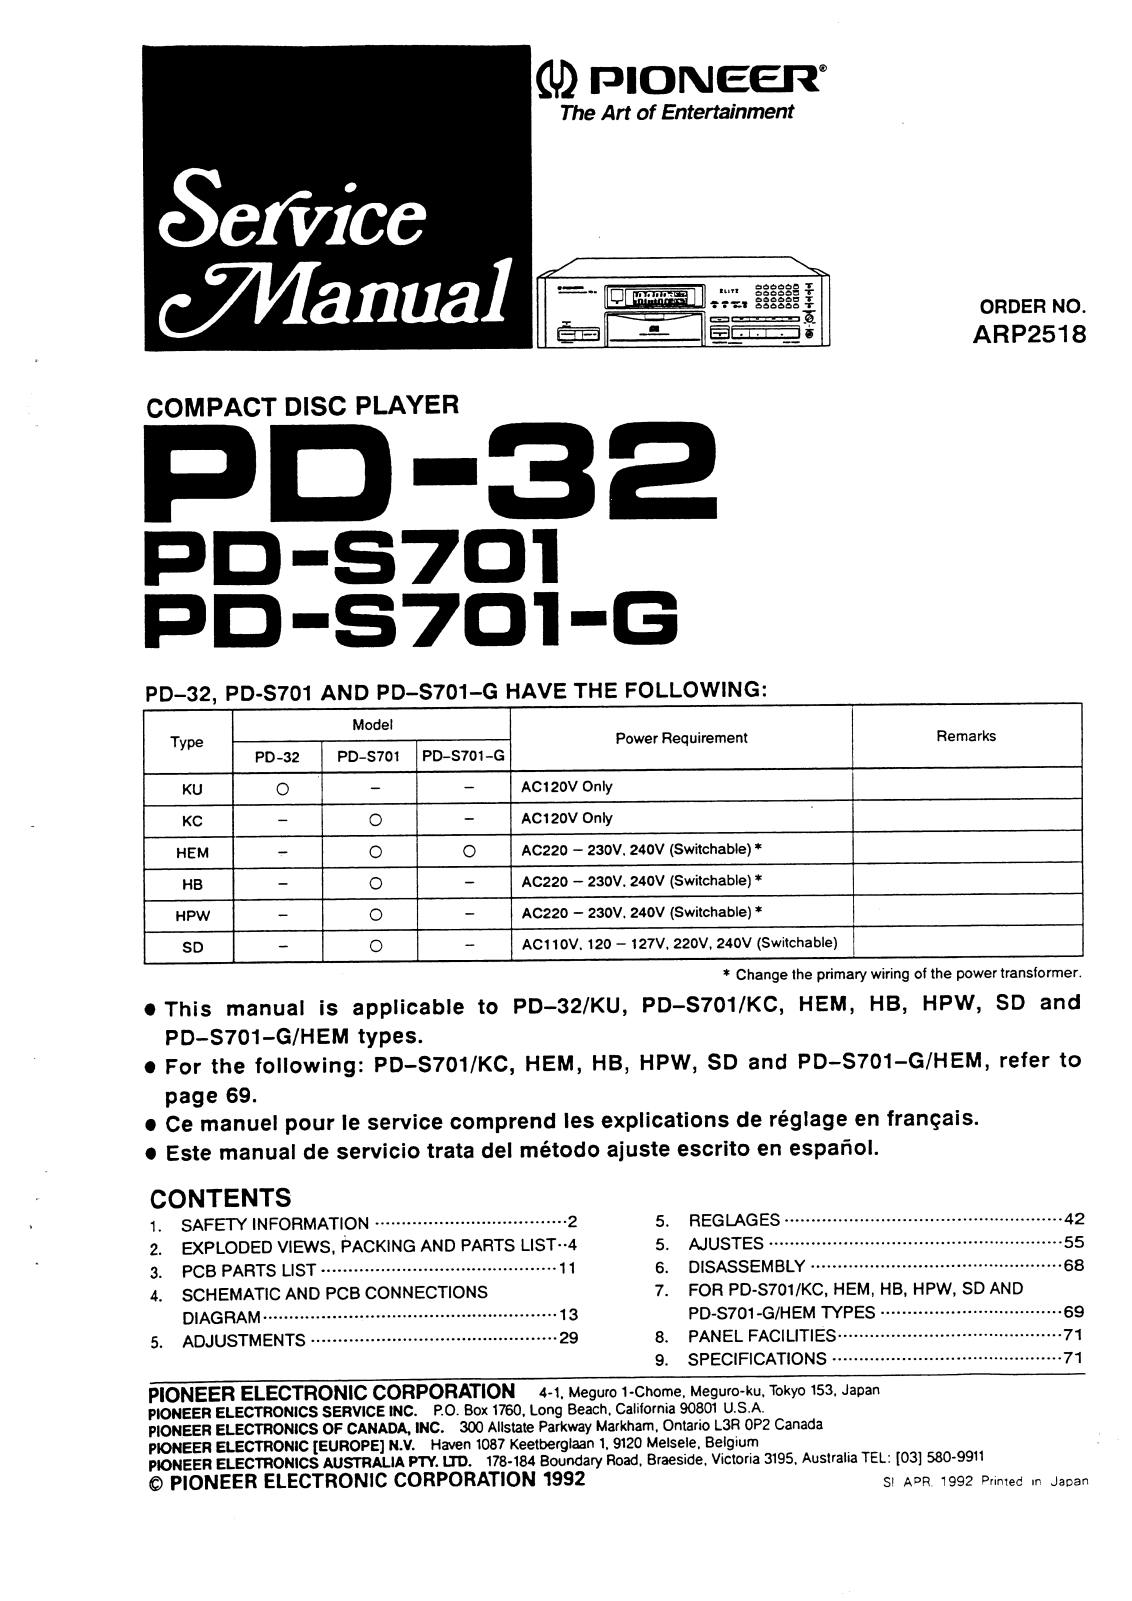 Pioneer PD-32, PDS-701, PDS-701-SG Service manual